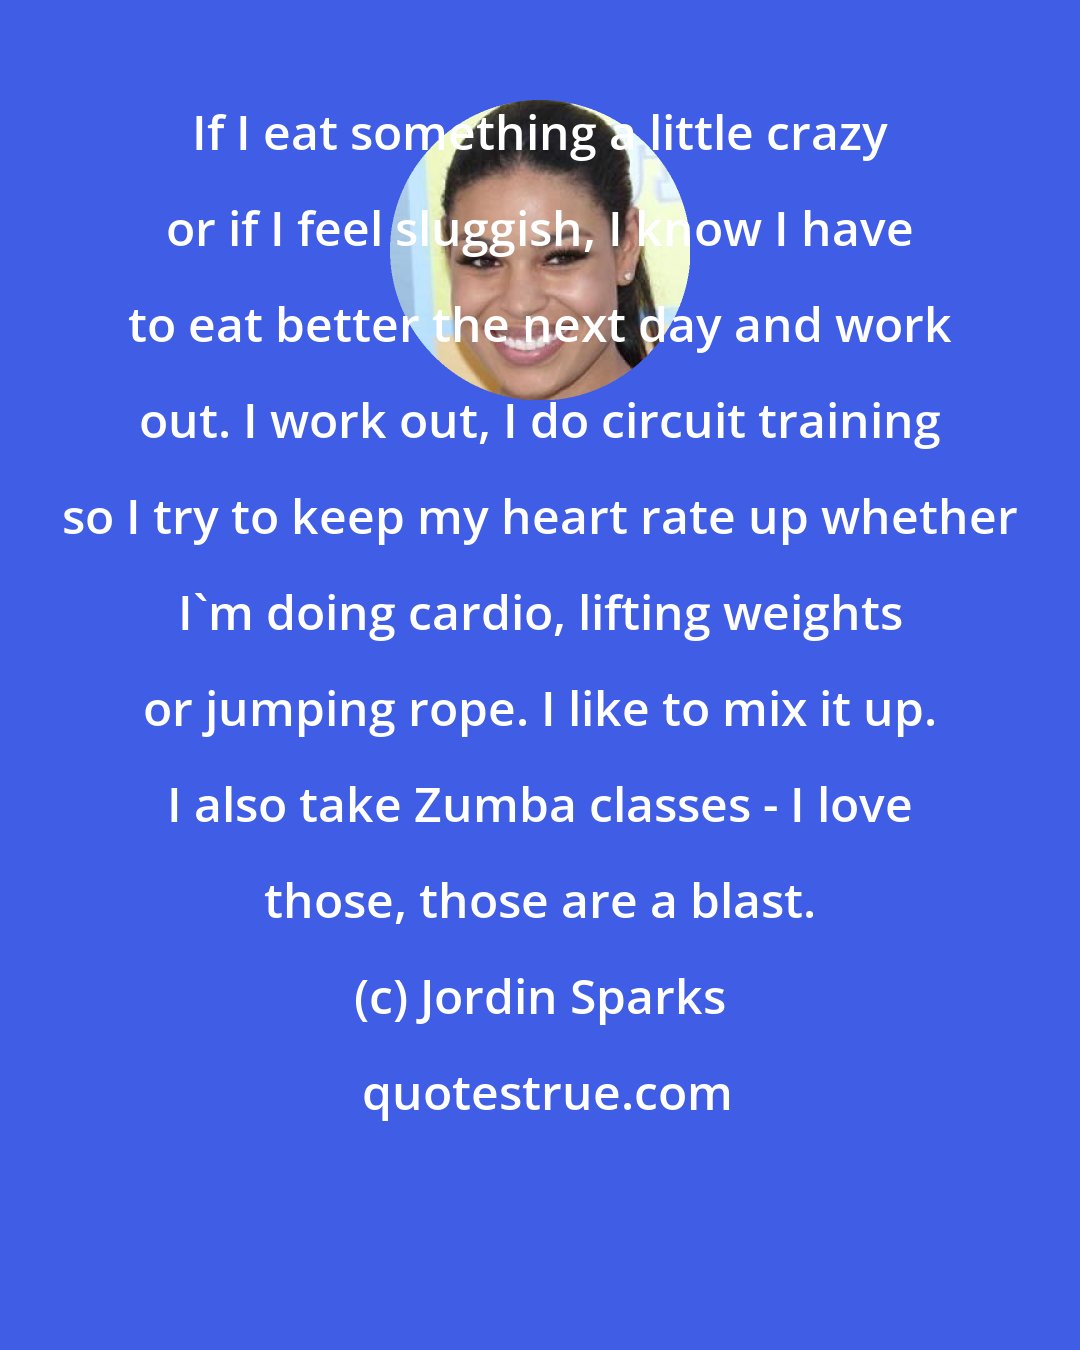 Jordin Sparks: If I eat something a little crazy or if I feel sluggish, I know I have to eat better the next day and work out. I work out, I do circuit training so I try to keep my heart rate up whether I'm doing cardio, lifting weights or jumping rope. I like to mix it up. I also take Zumba classes - I love those, those are a blast.